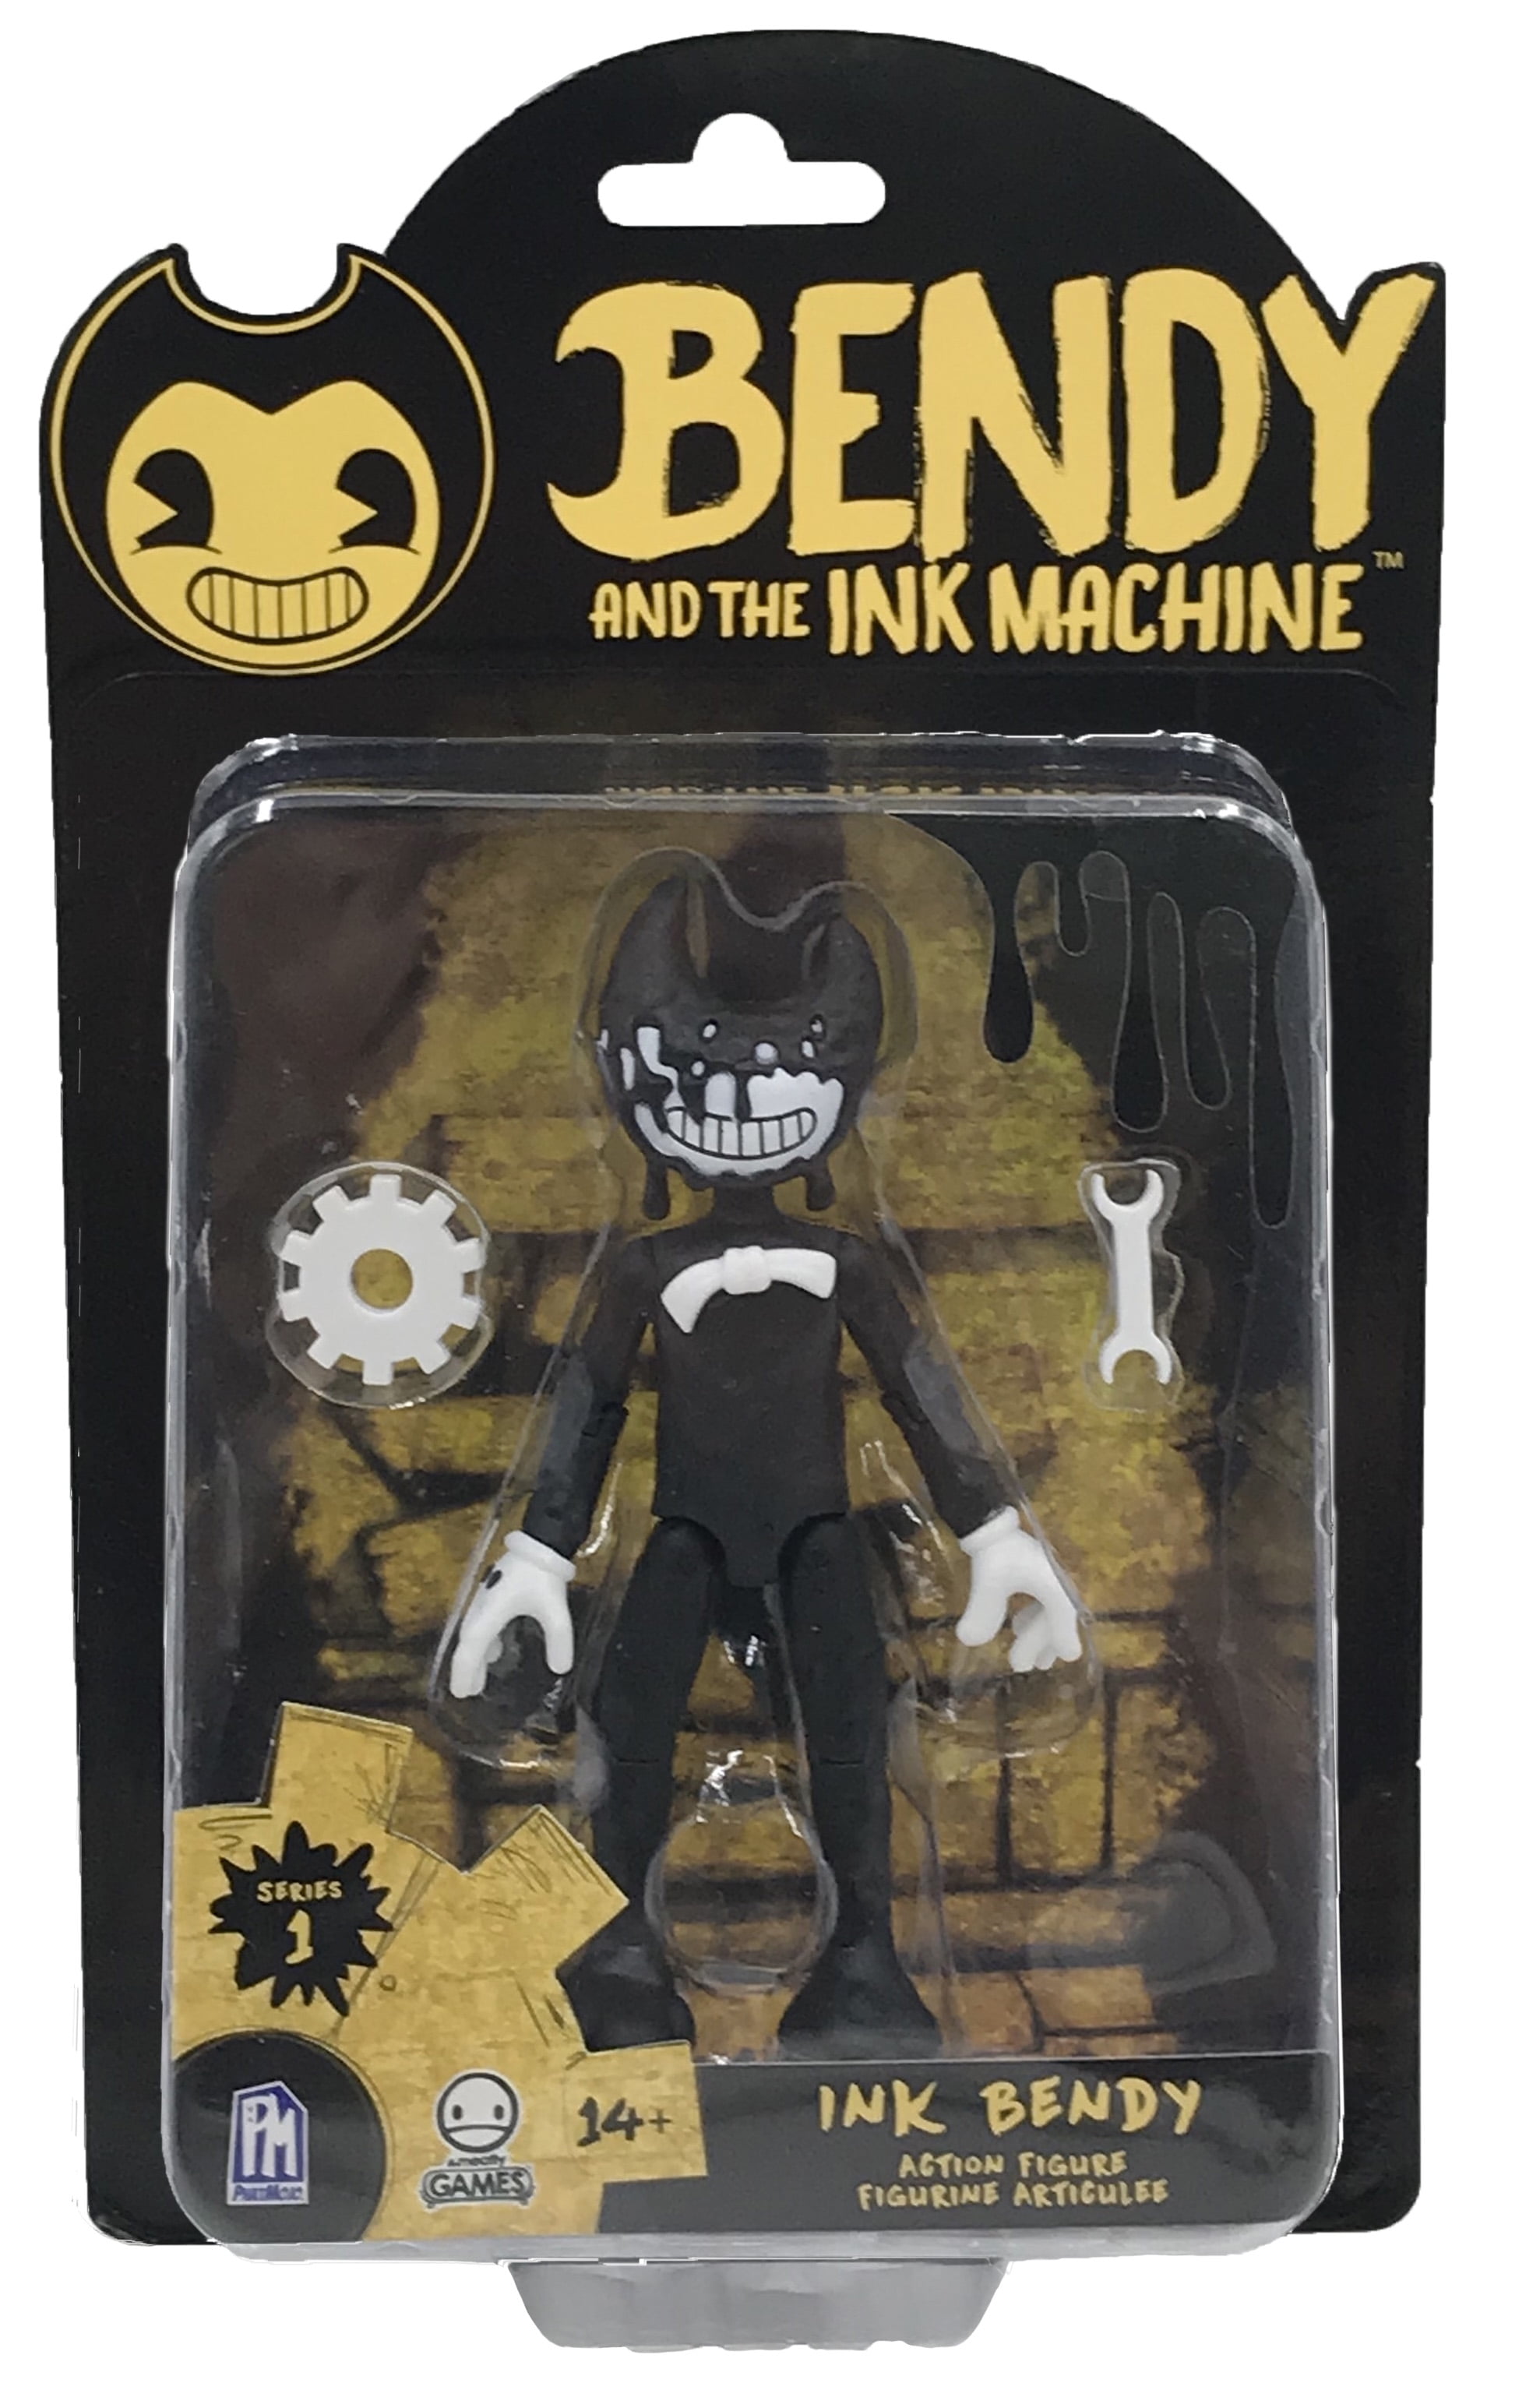 Bendy And The Ink Machine Inky Bendy Action Figure Af6603